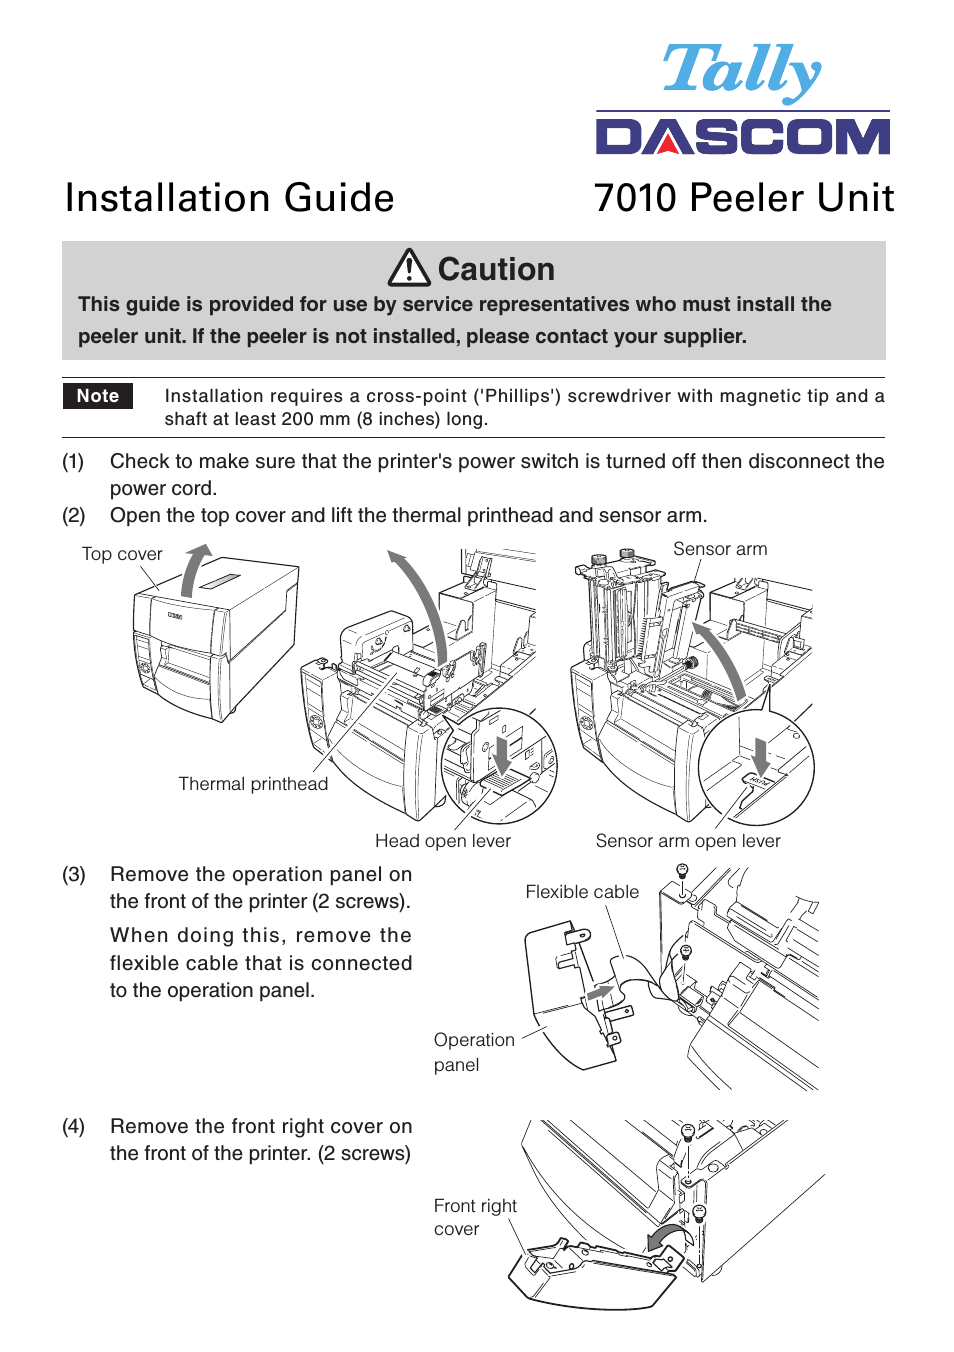 7010 Peeler Installation and User Guide